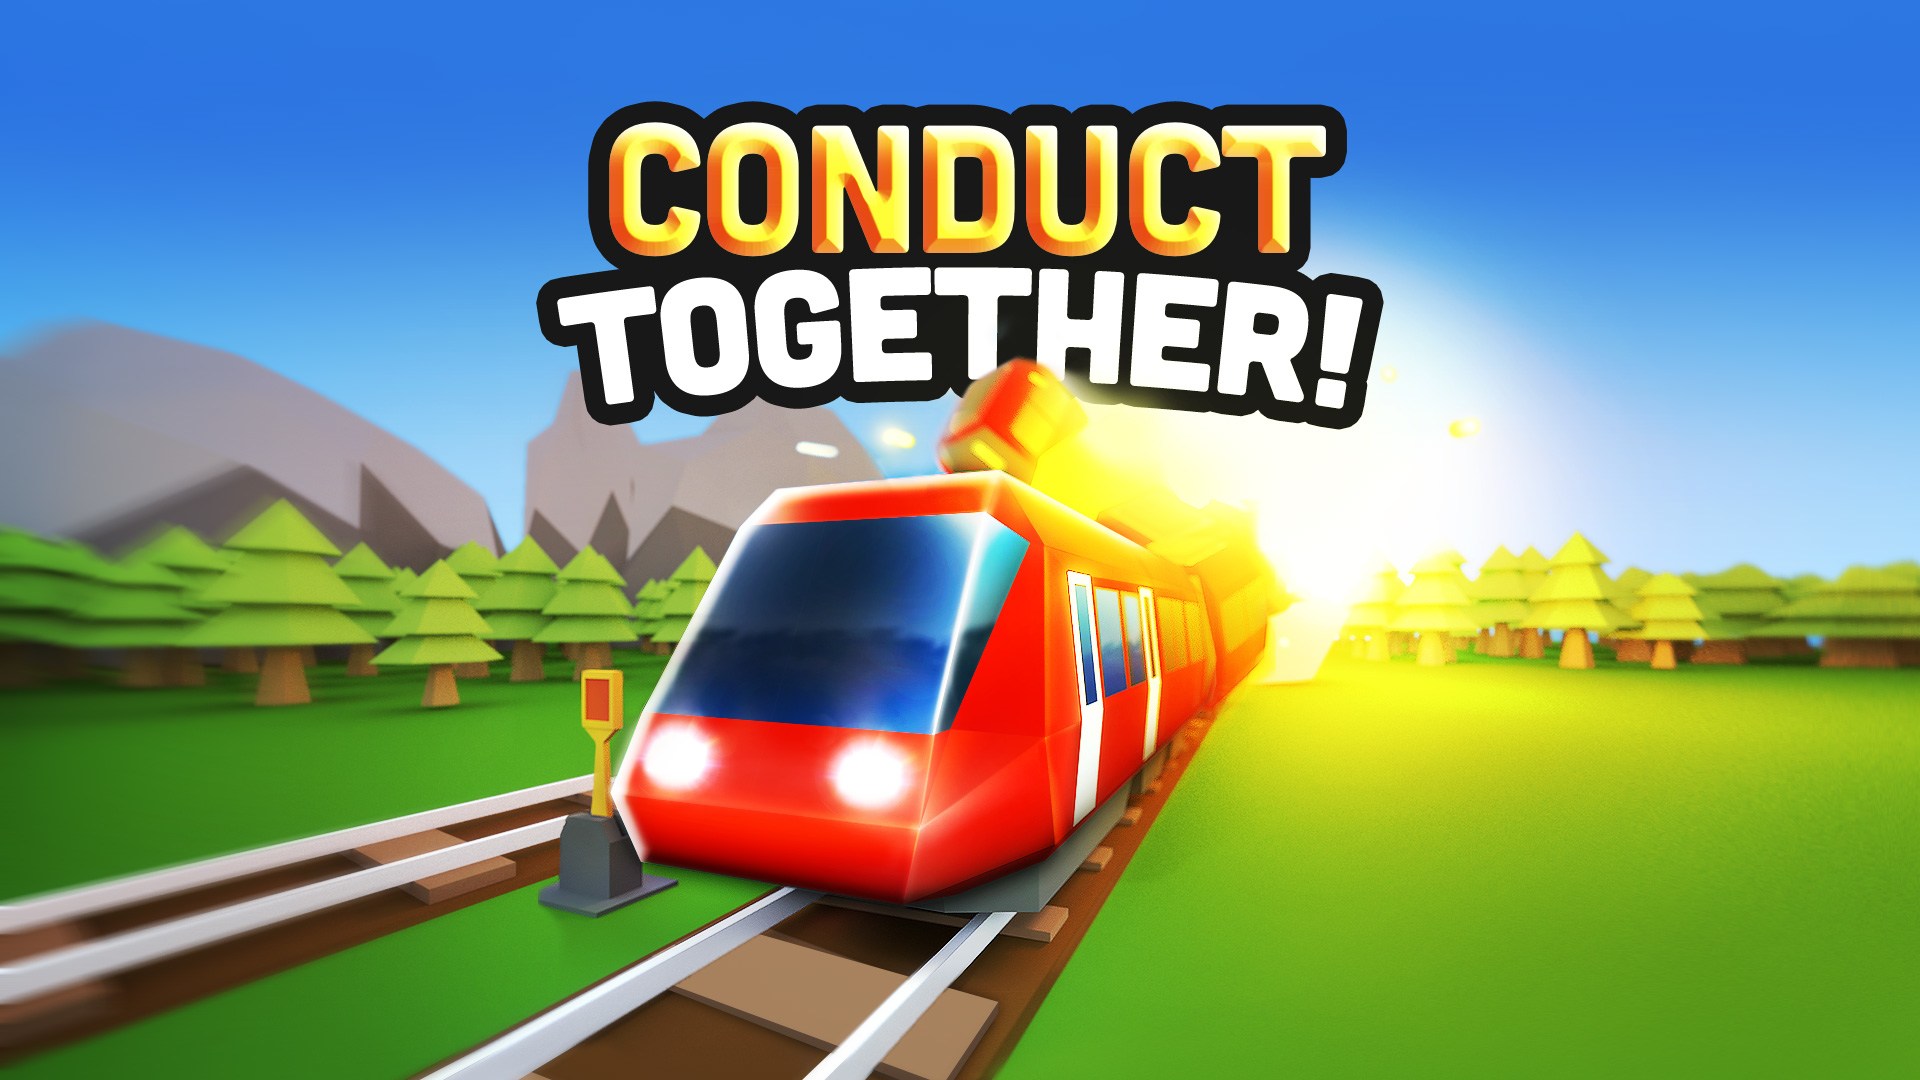 Conduct TOGETHER! 1